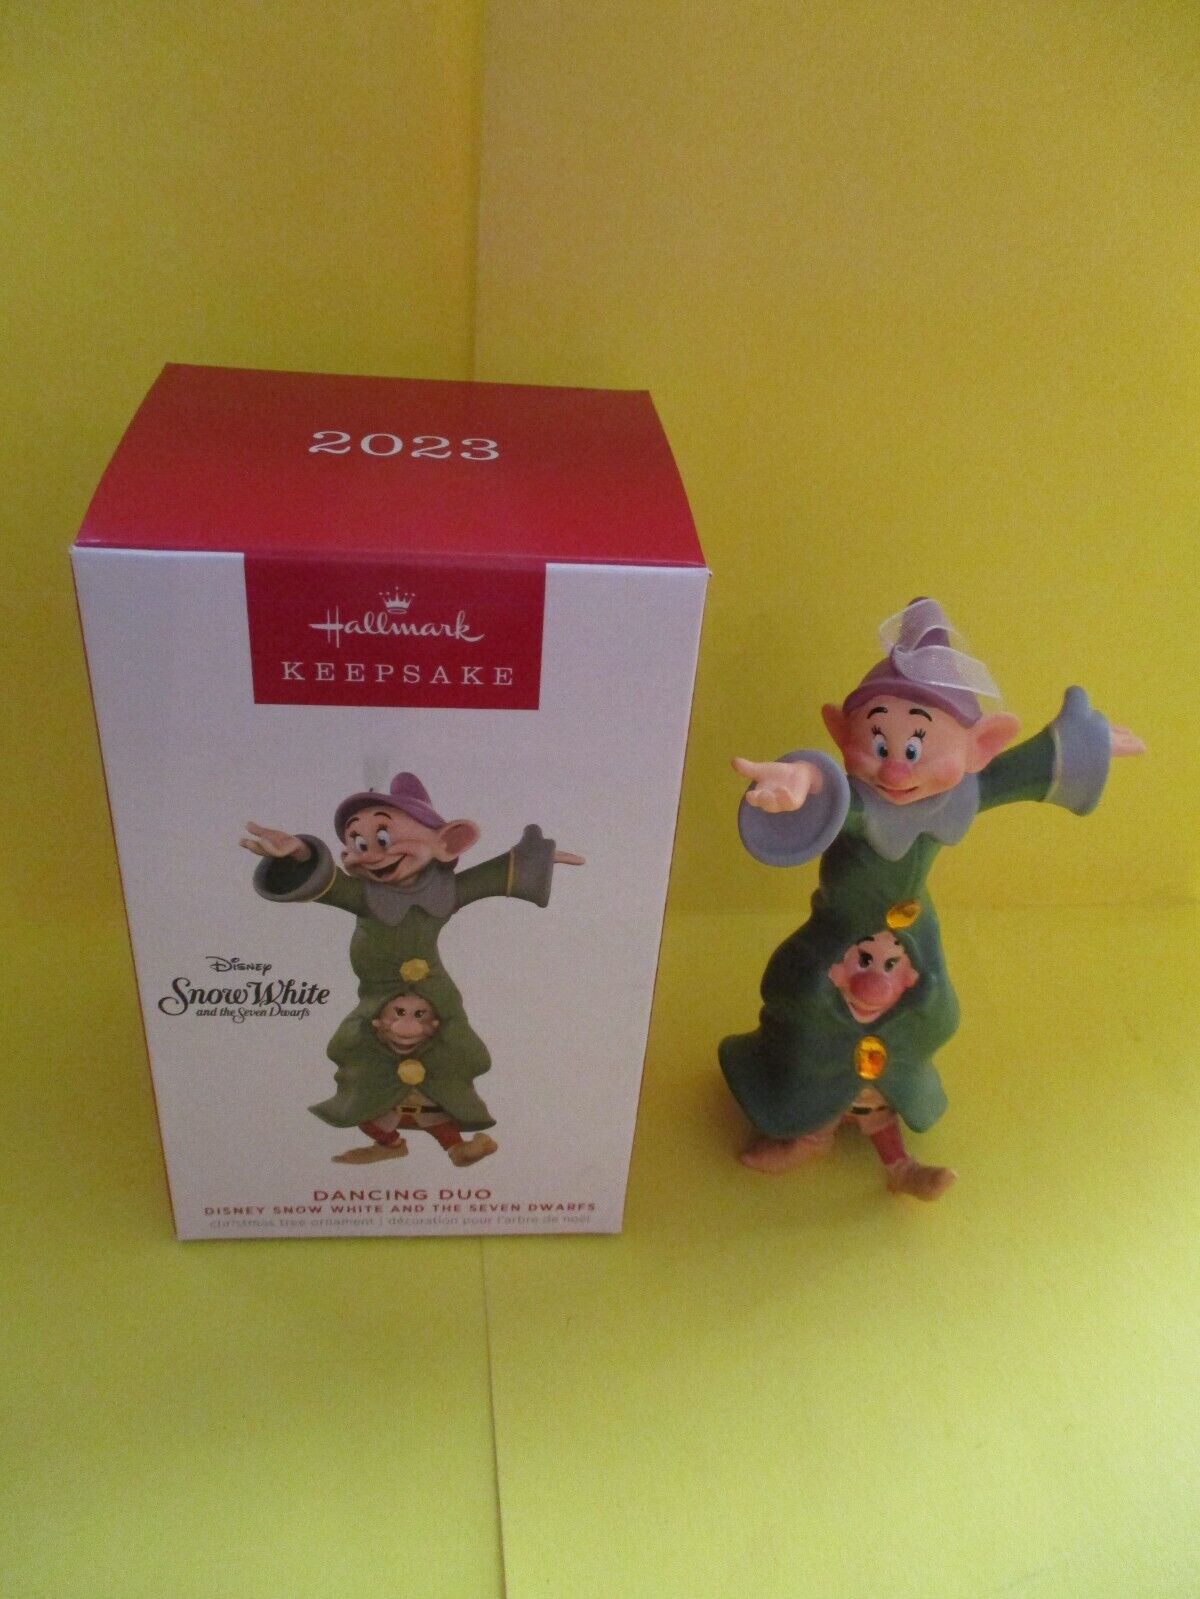 2023 Hallmark Dancing Duo Disney Snow White and the Seven Dwarfs New but SDB